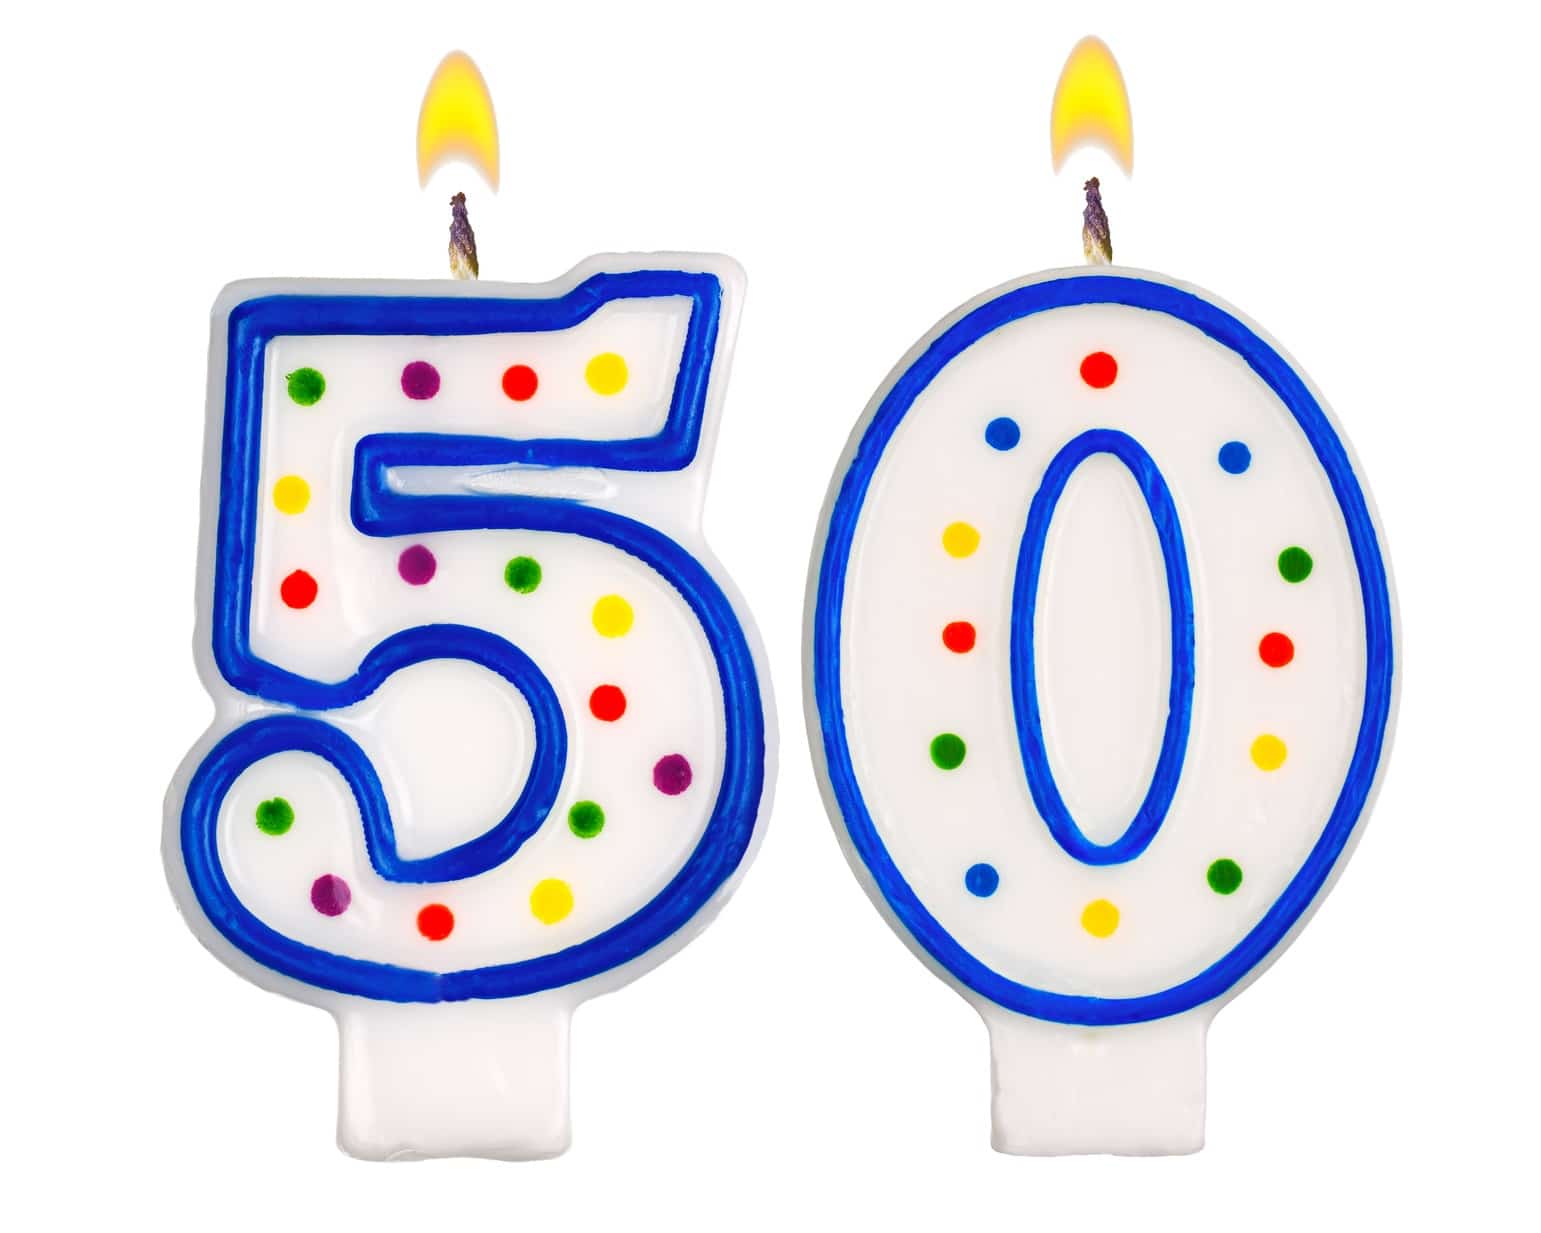 Candles depicting the number 50.